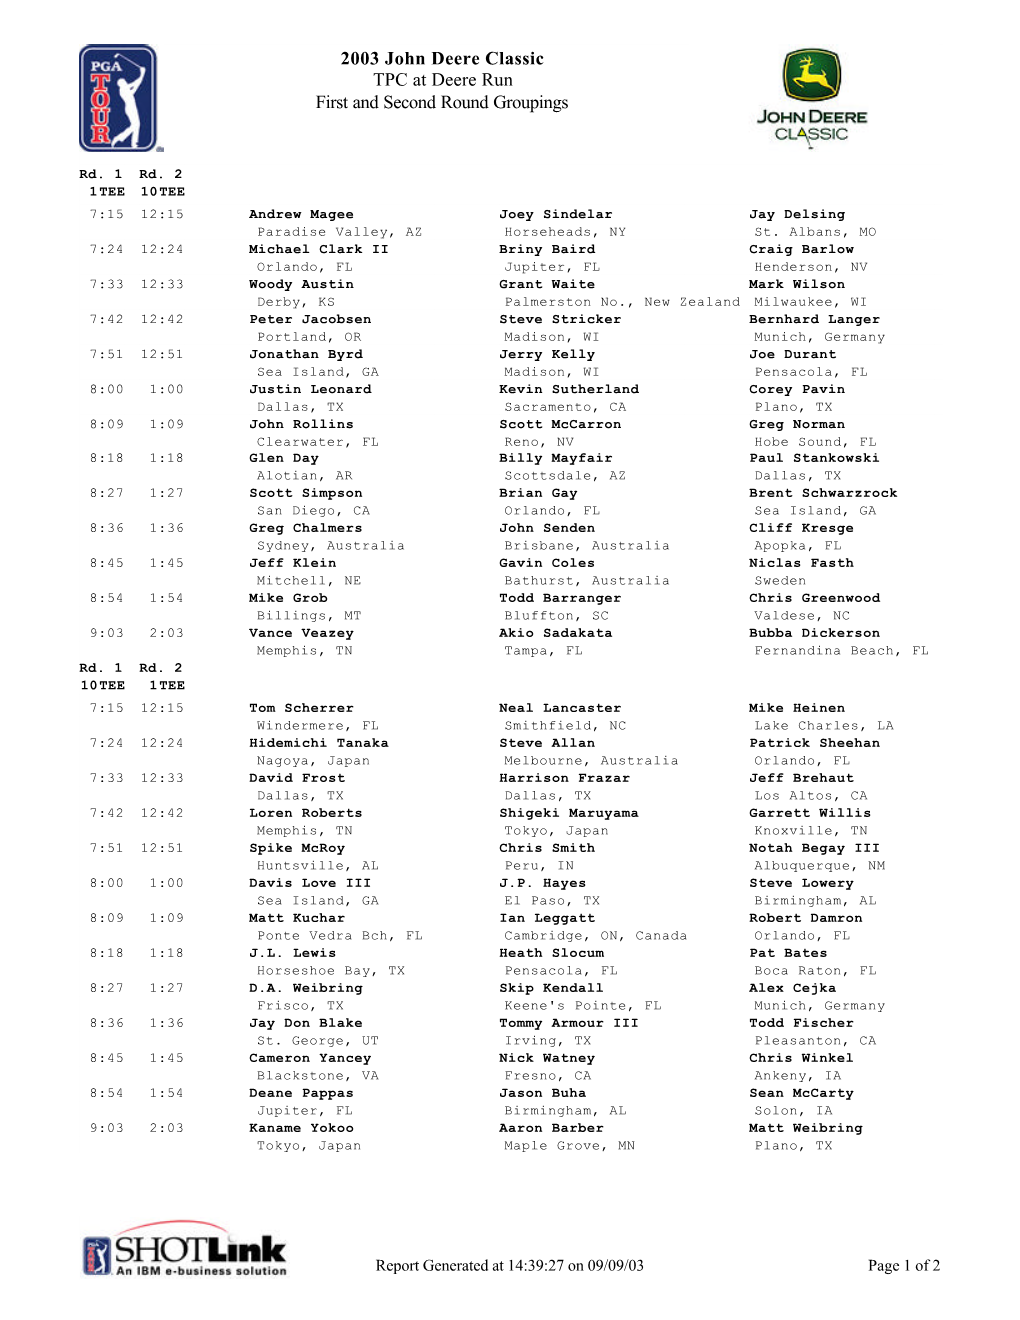 2003 John Deere Classic TPC at Deere Run First and Second Round Groupings